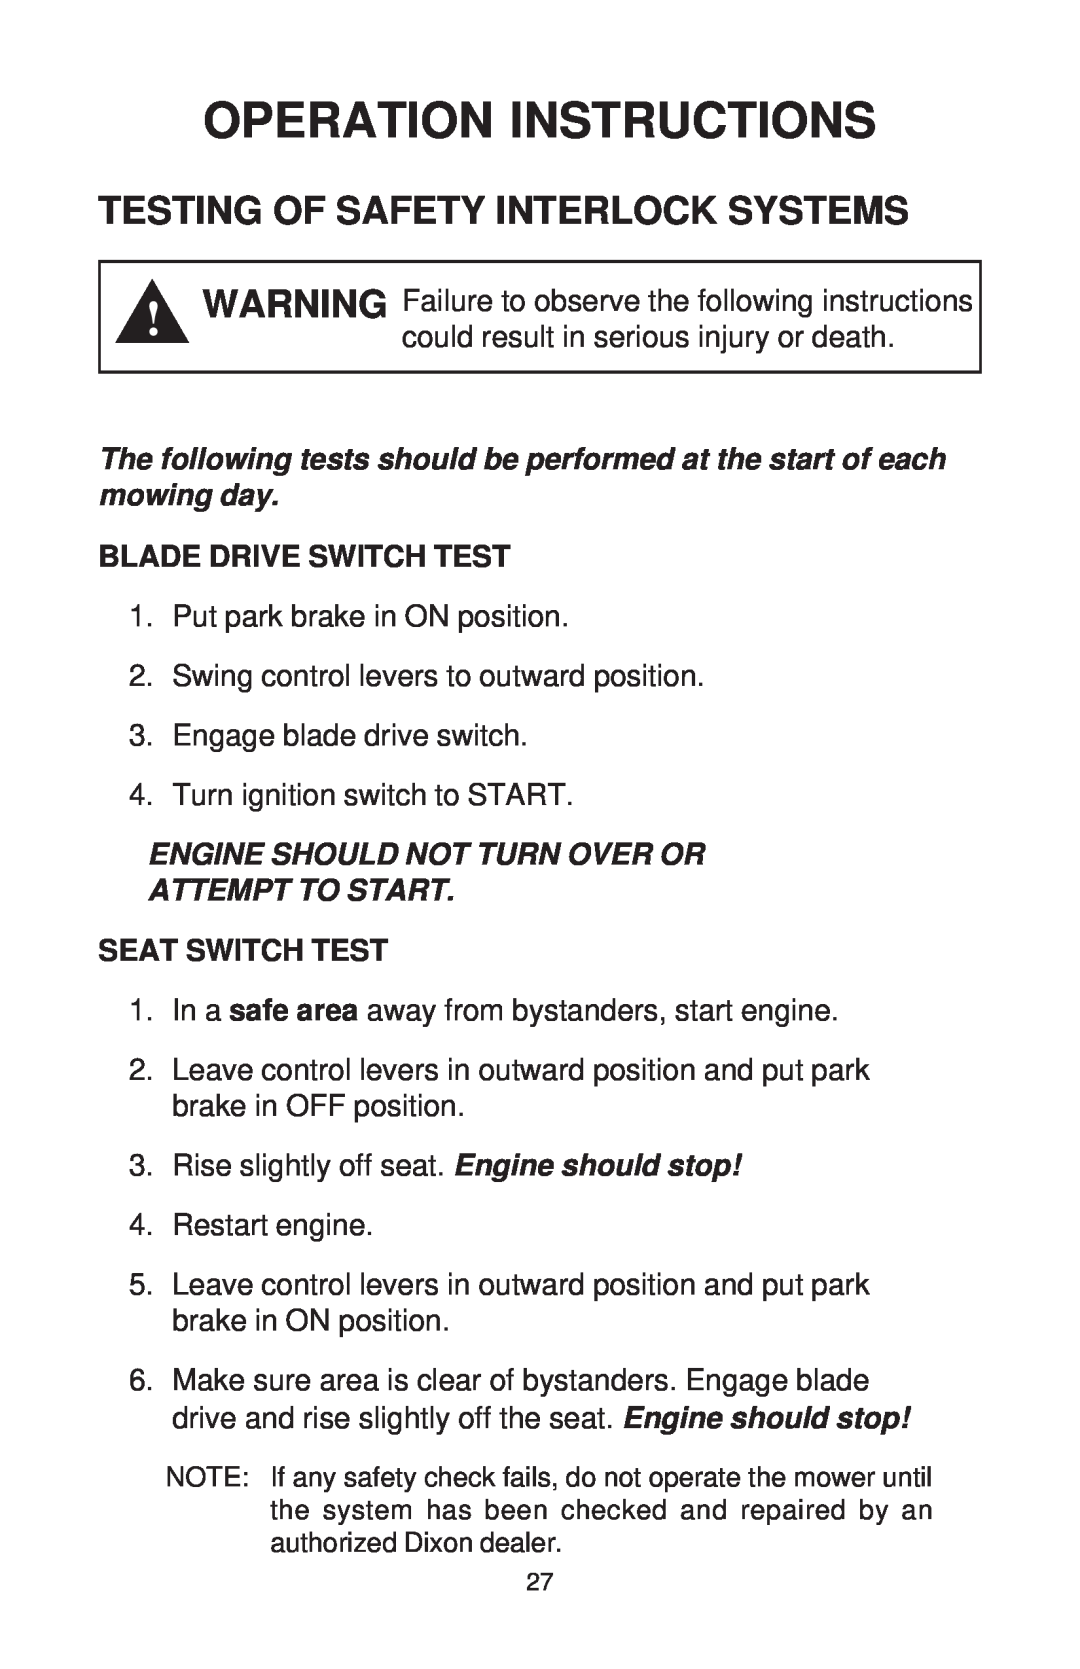 Dixon ZTR 44/968999538 manual Operation Instructions, Testing Of Safety Interlock Systems, Blade Drive Switch Test 